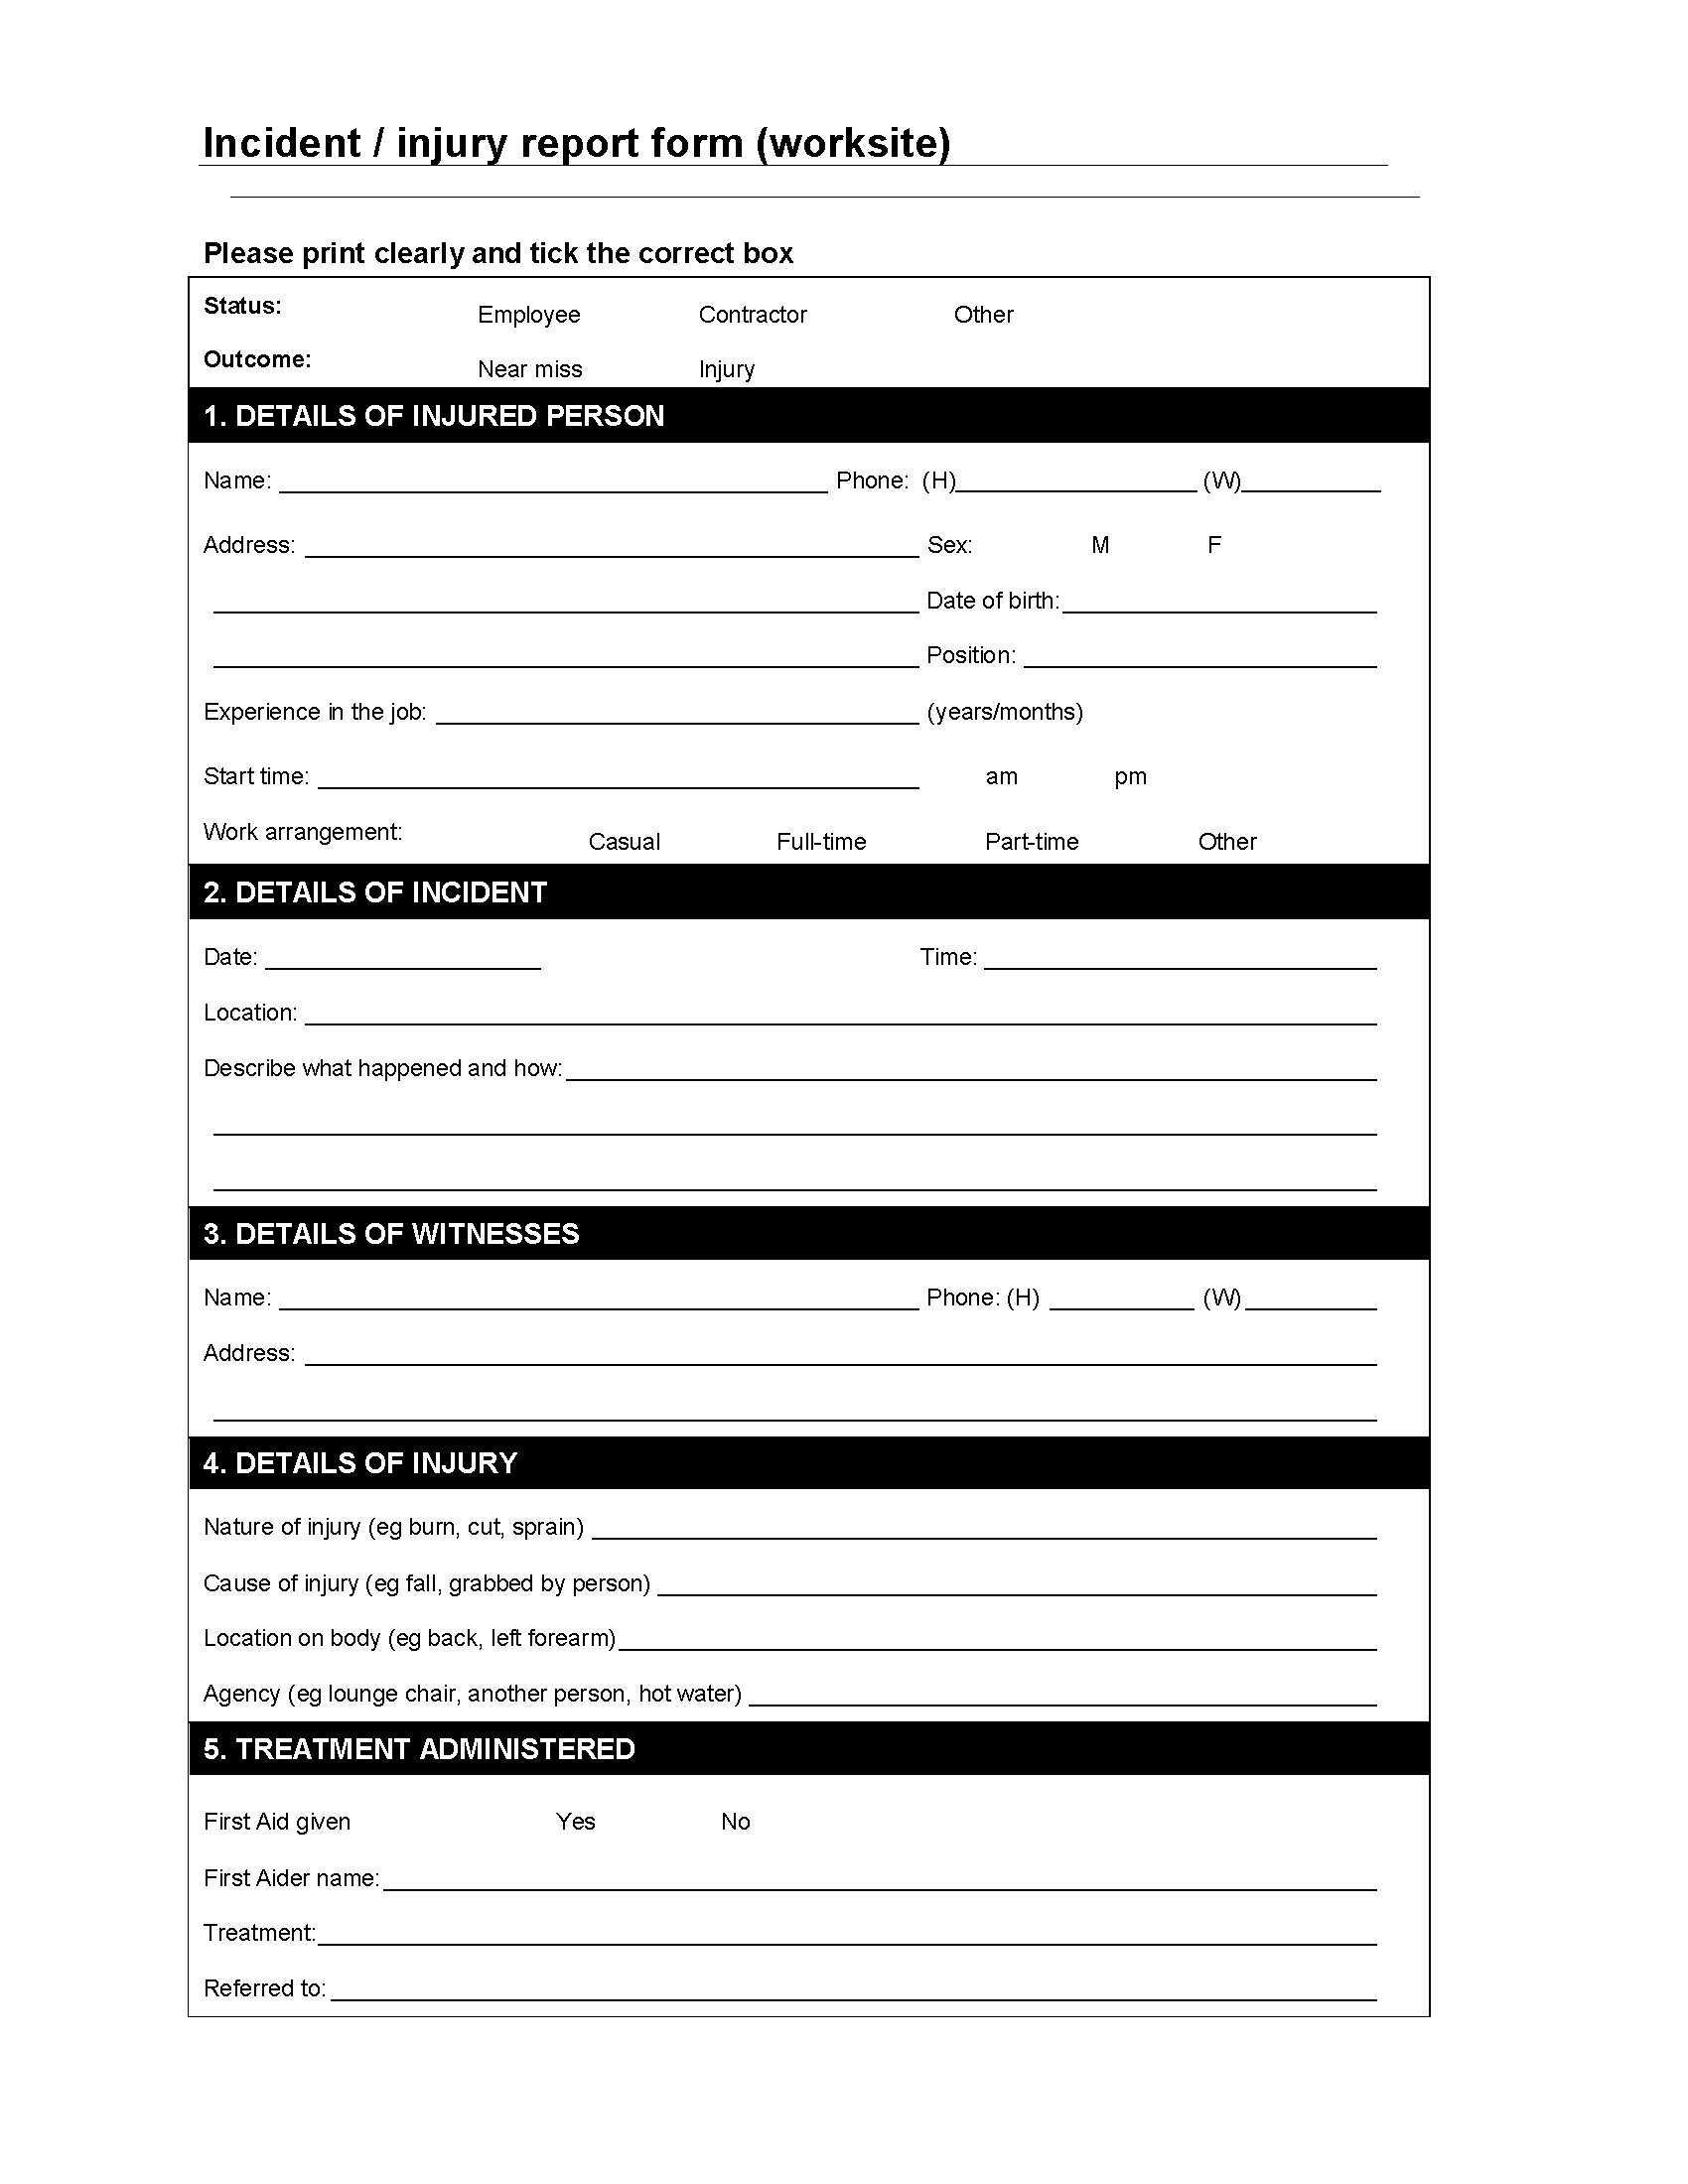 Worksite Incident / Injury Report Form | Legal Forms And Intended For Injury Report Form Template